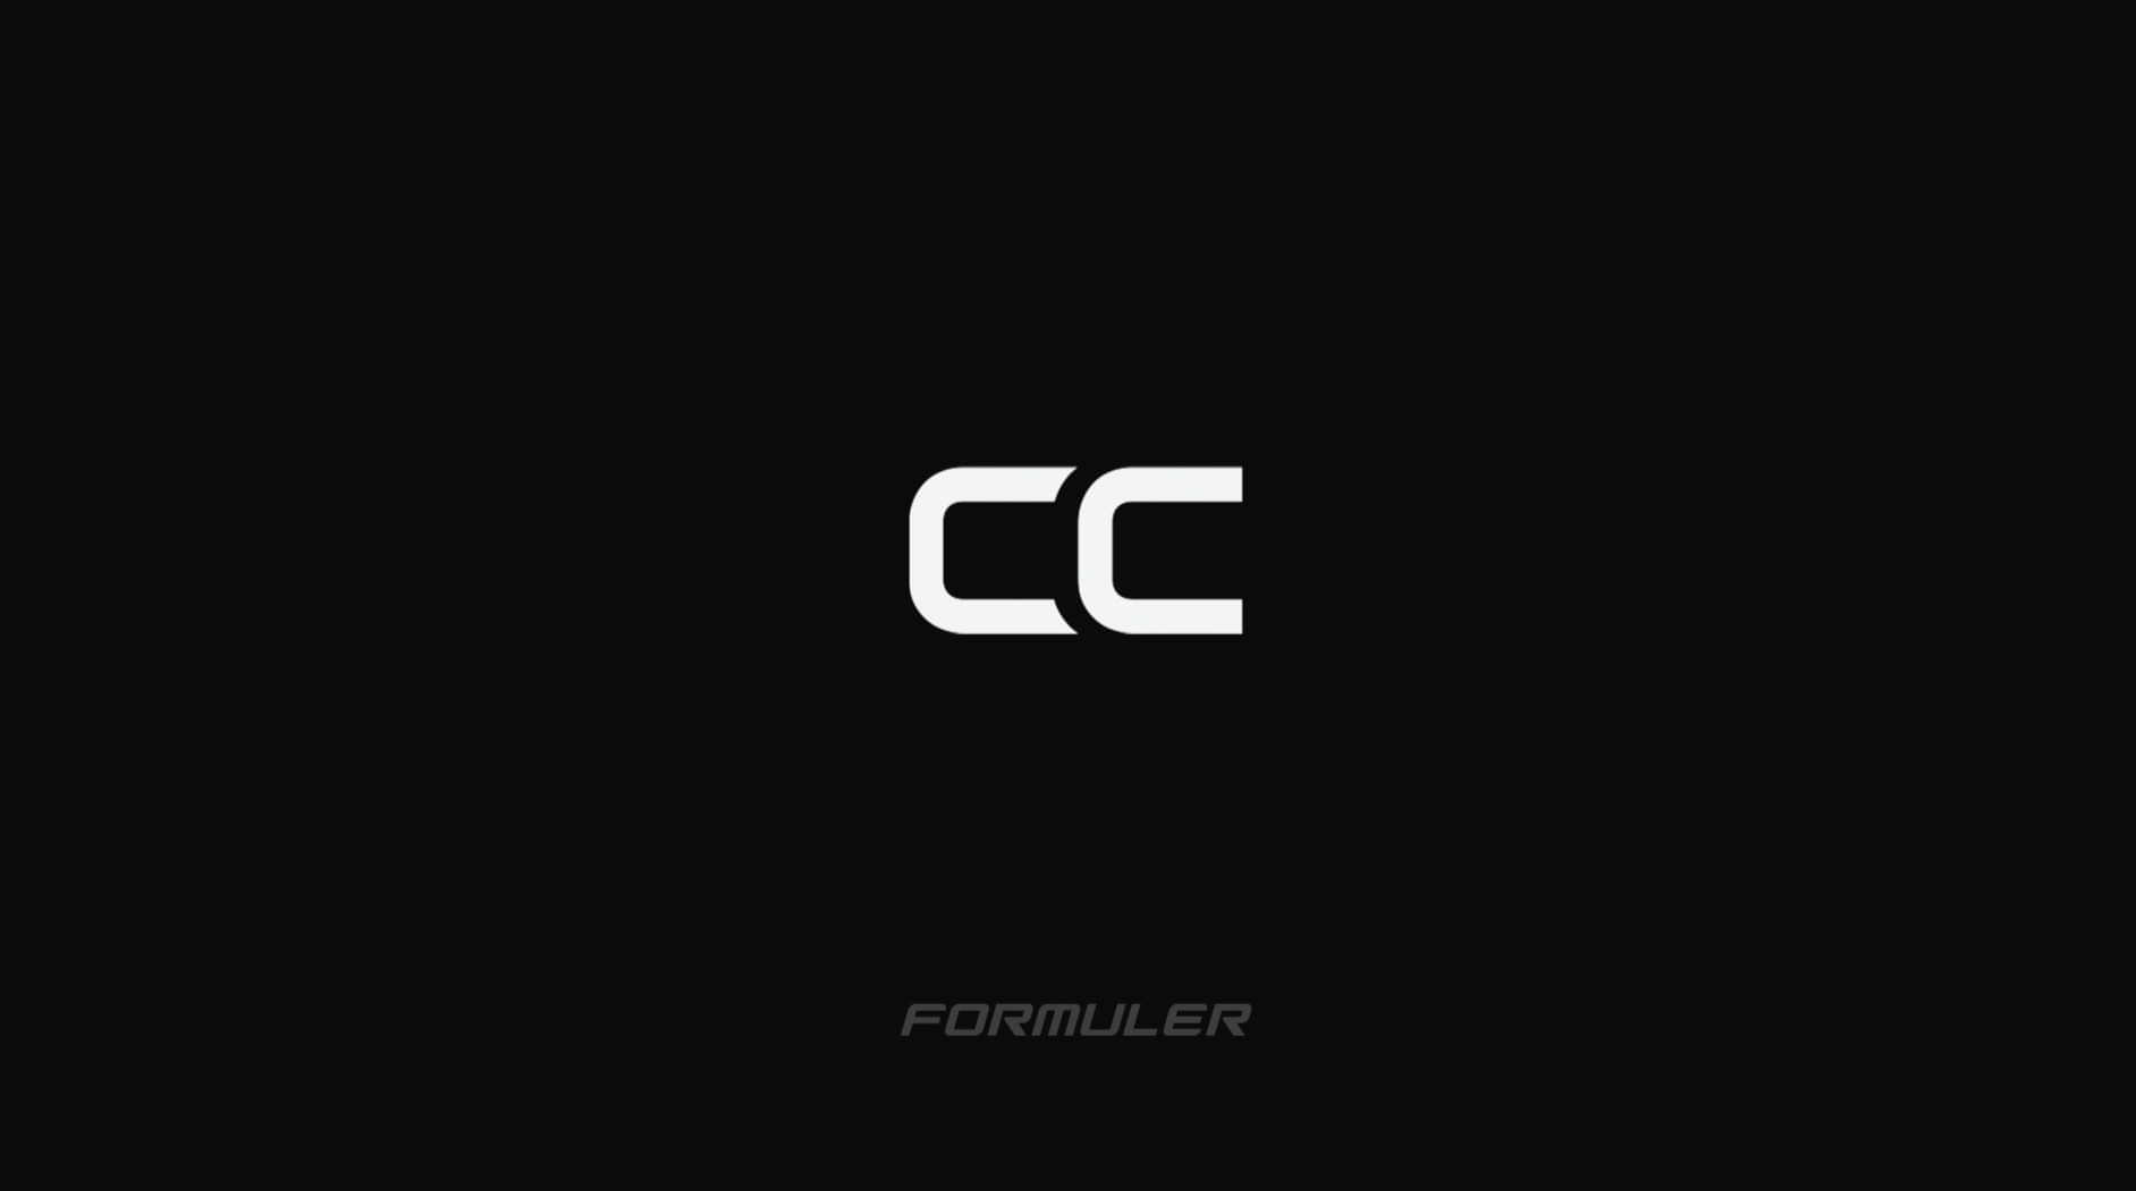 Review about new CC Box - CC - Formuler-Support (English)